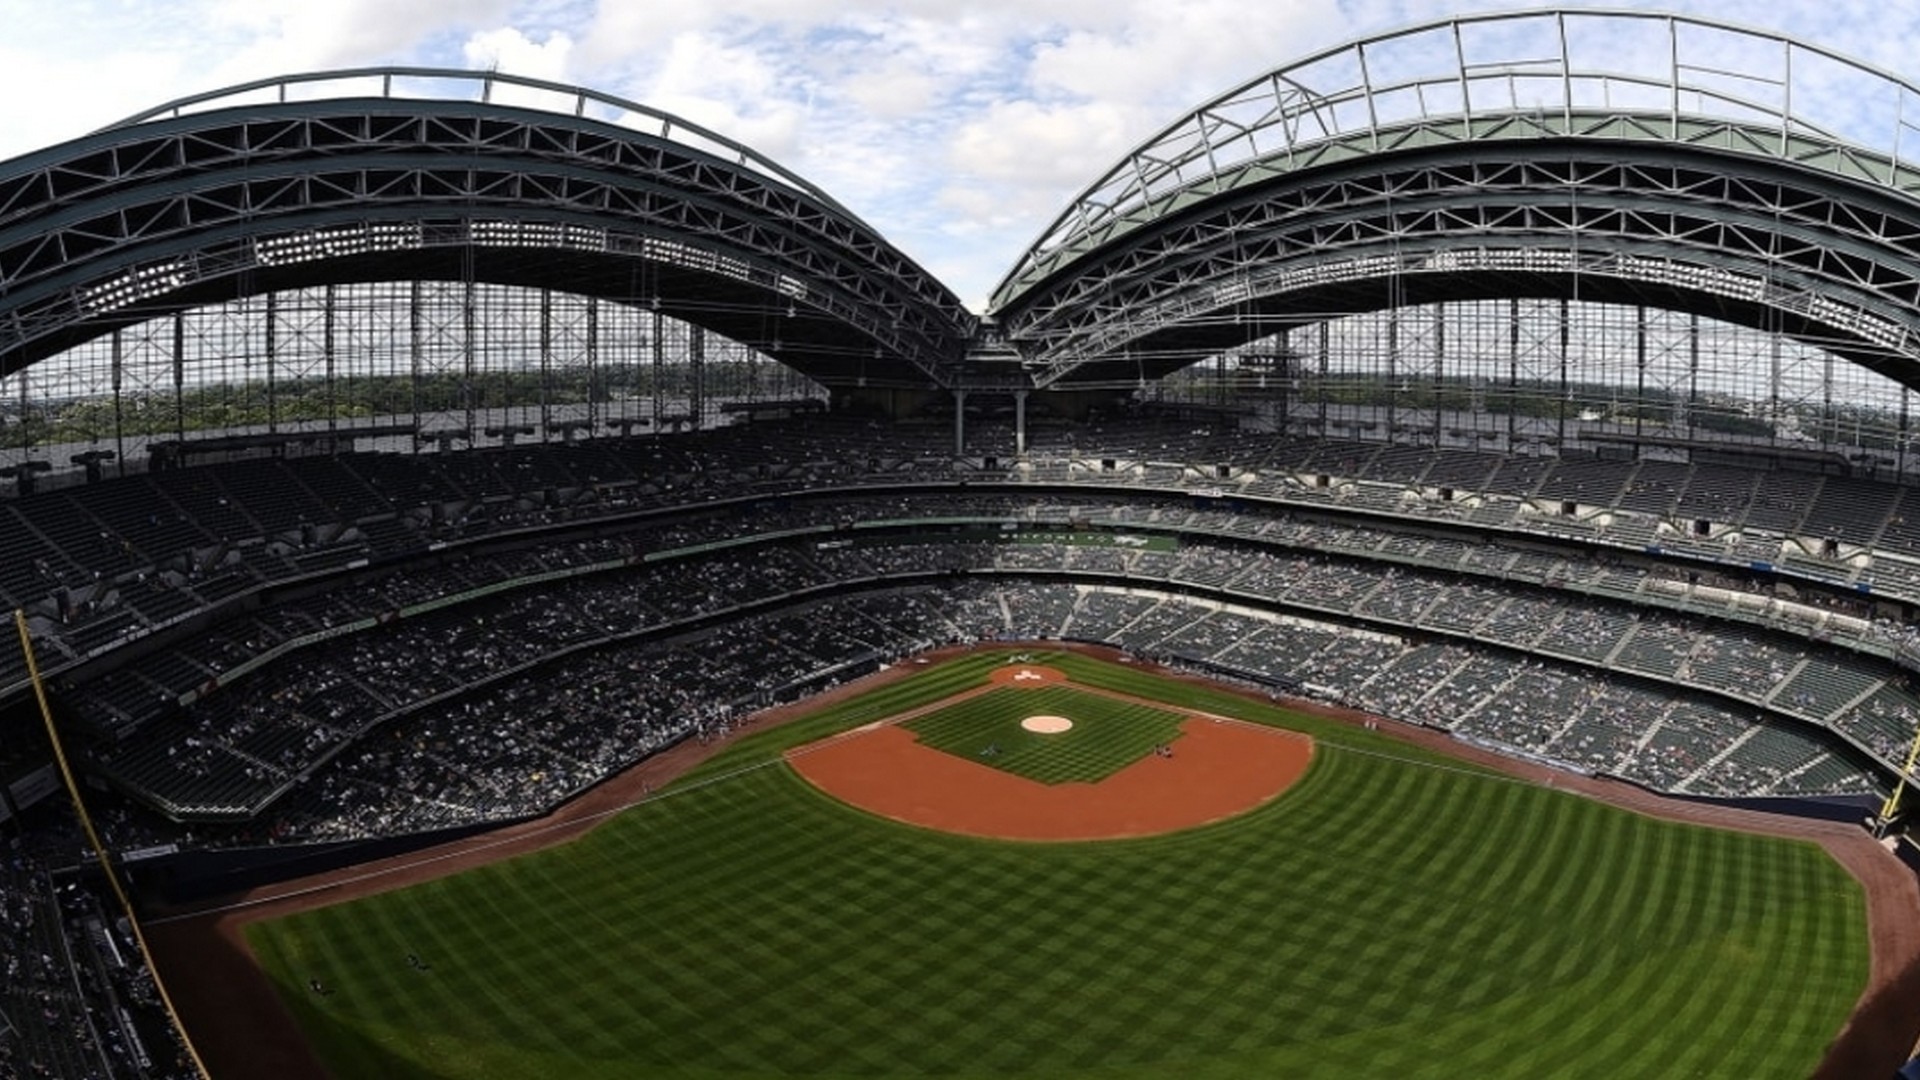 Wallpapers HD Milwaukee Brewers Stadium With high-resolution 1920X1080 pixel. You can use this wallpaper for Mac Desktop Wallpaper, Laptop Screensavers, Android Wallpapers, Tablet or iPhone Home Screen and another mobile phone device